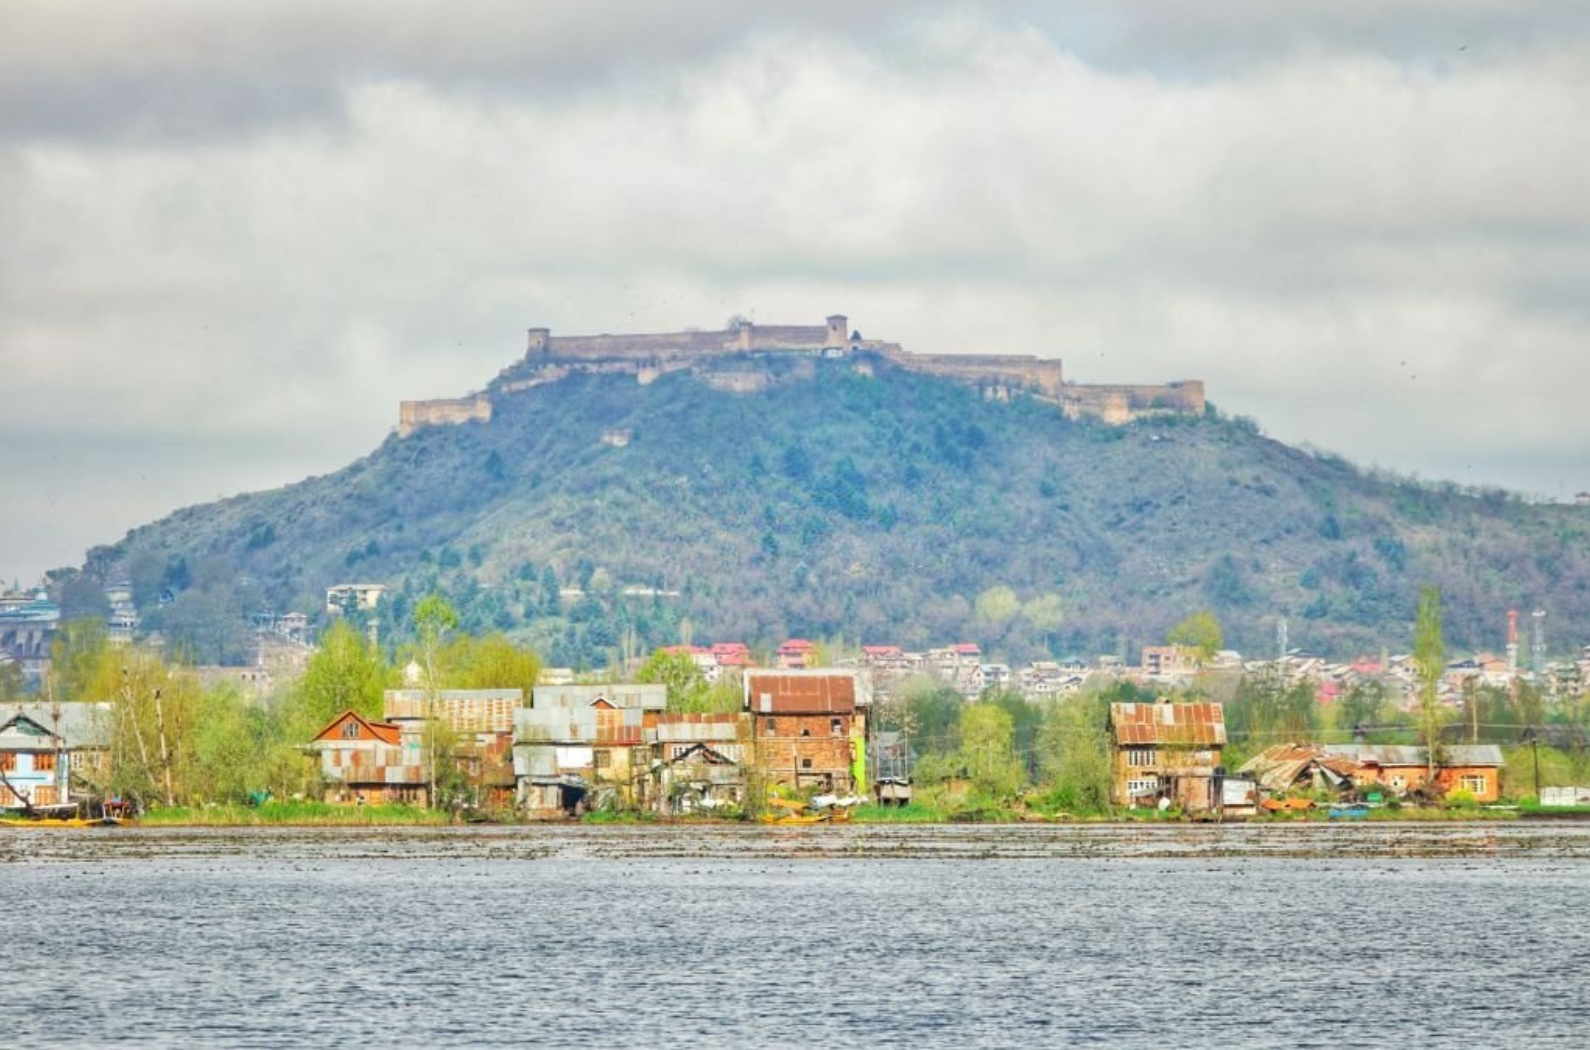 The Hari Parbat Fort perched on the top of a Hill overlooking the famous Dal Lake in Srinagar, Kashmir.